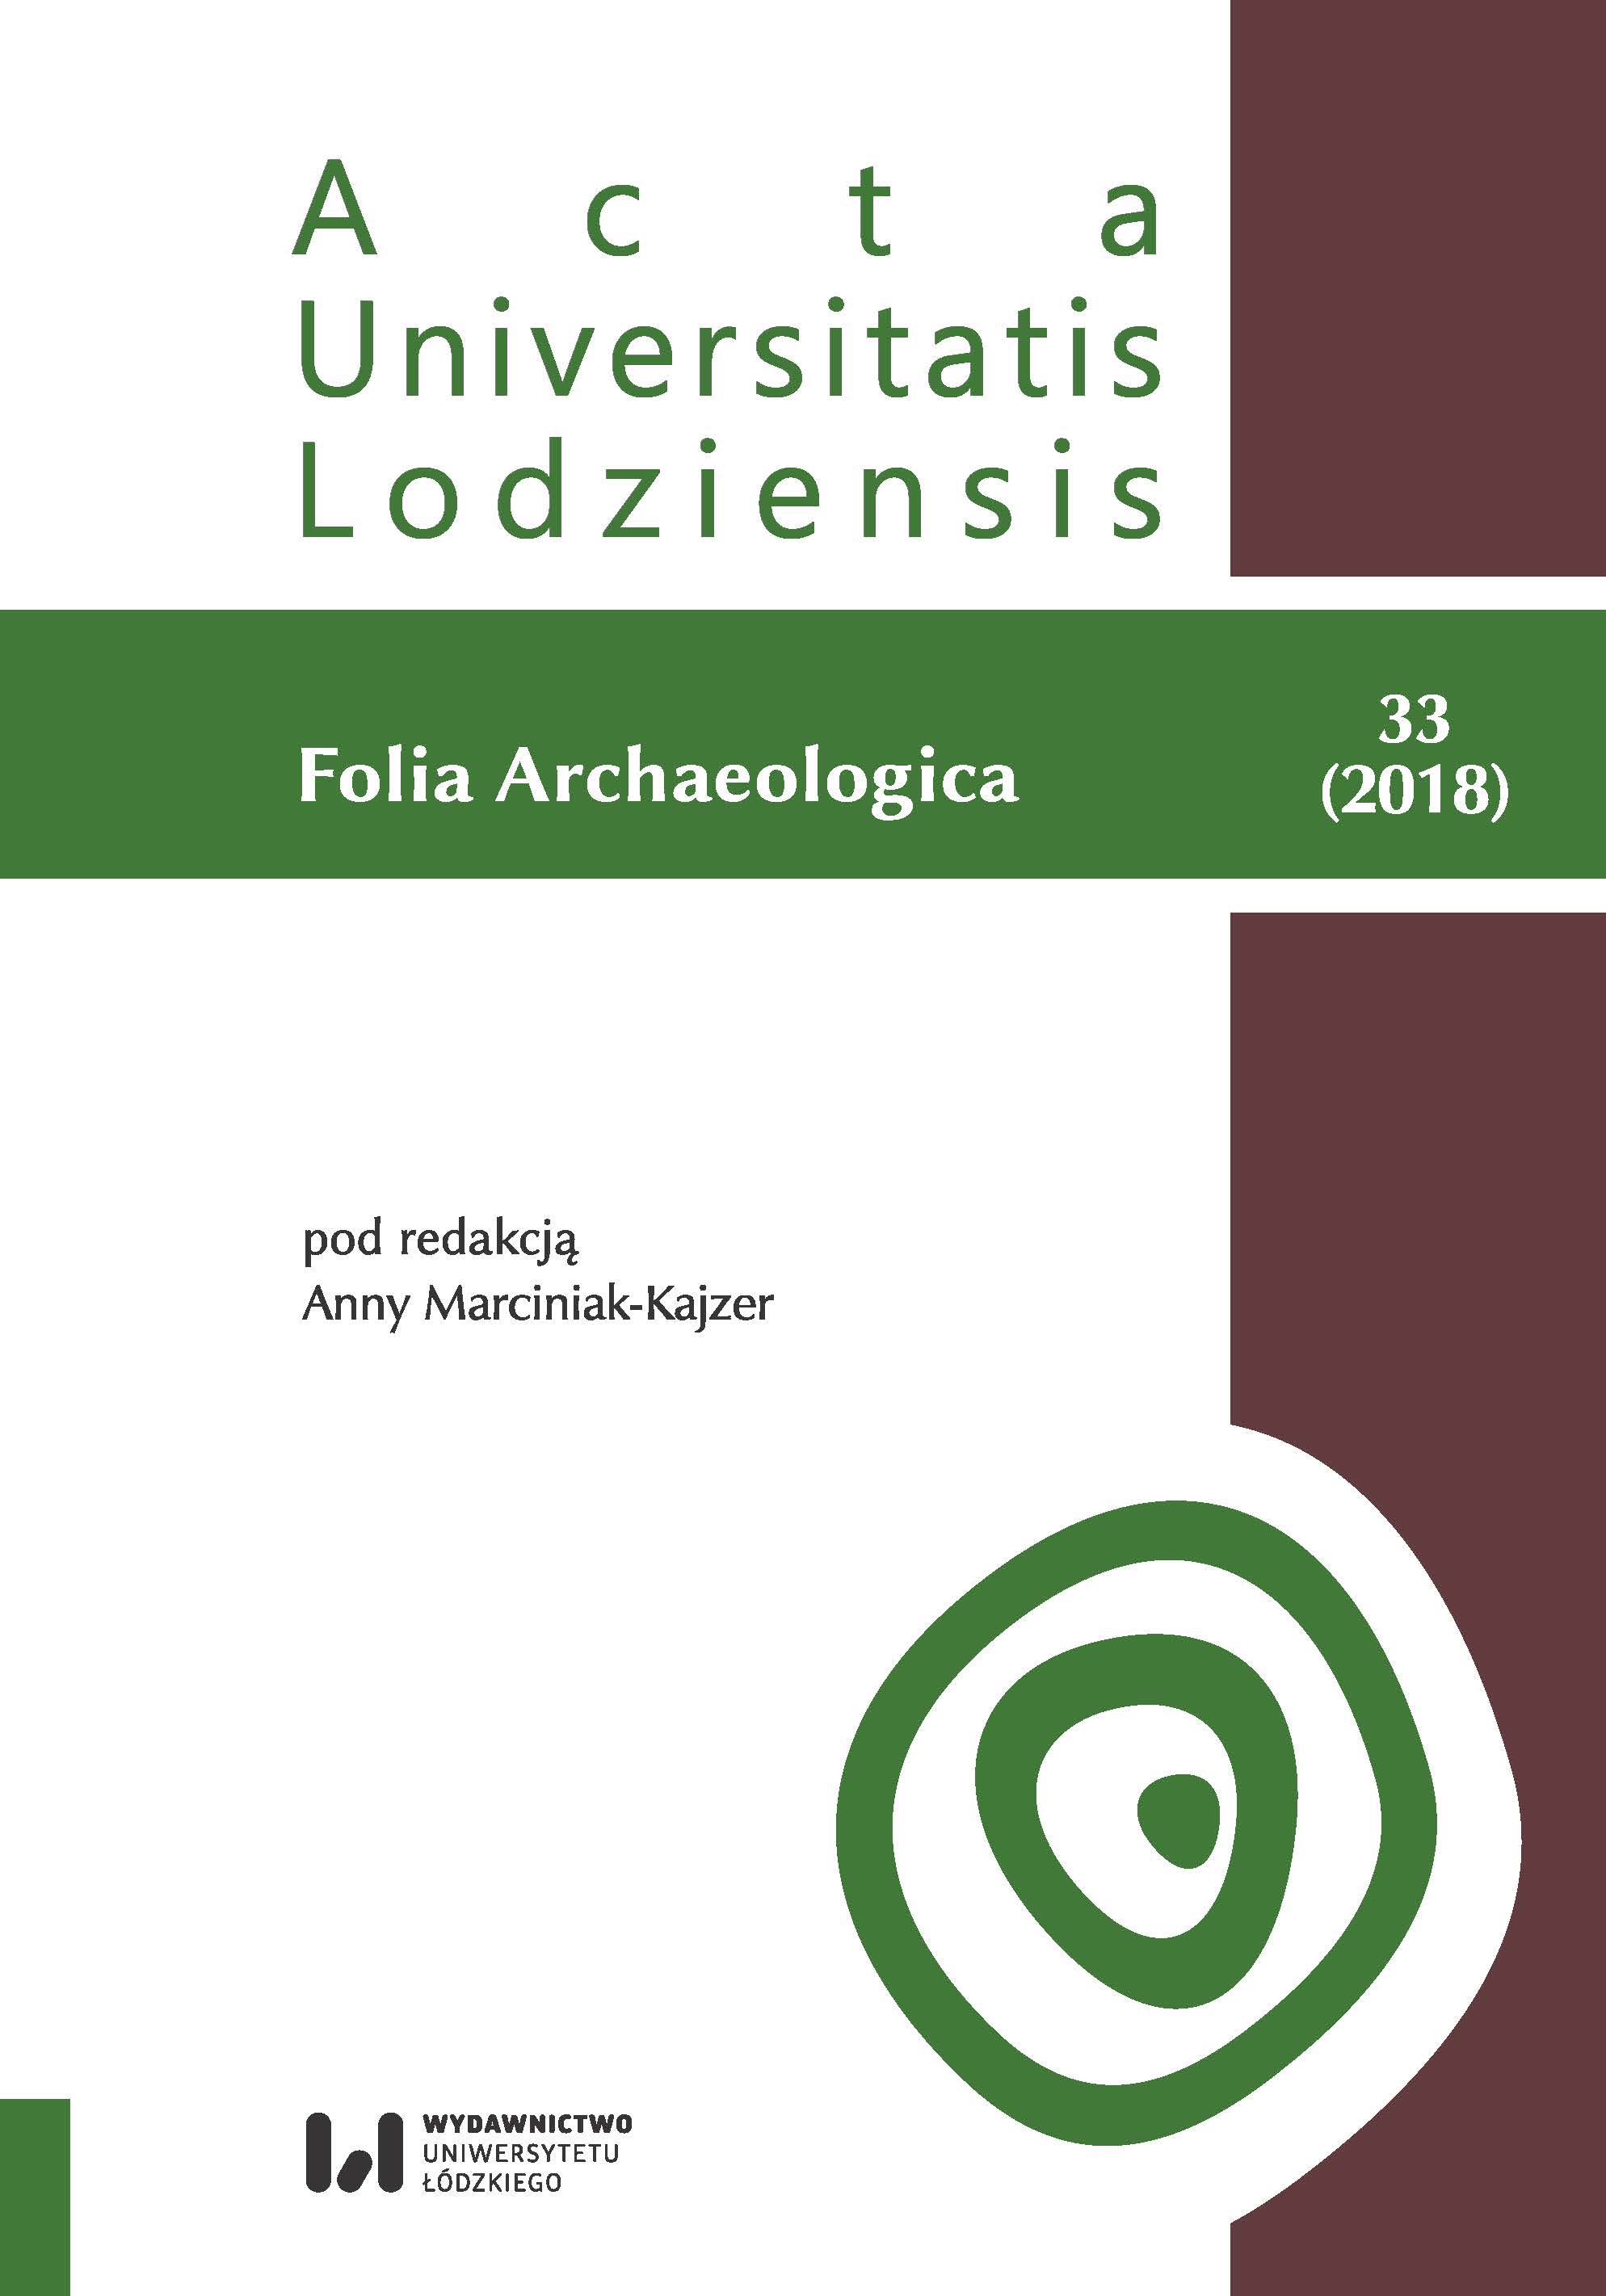 Late medieval pottery from motte in Gieczno, commune and county Zgierz, Łódź voivodship Cover Image